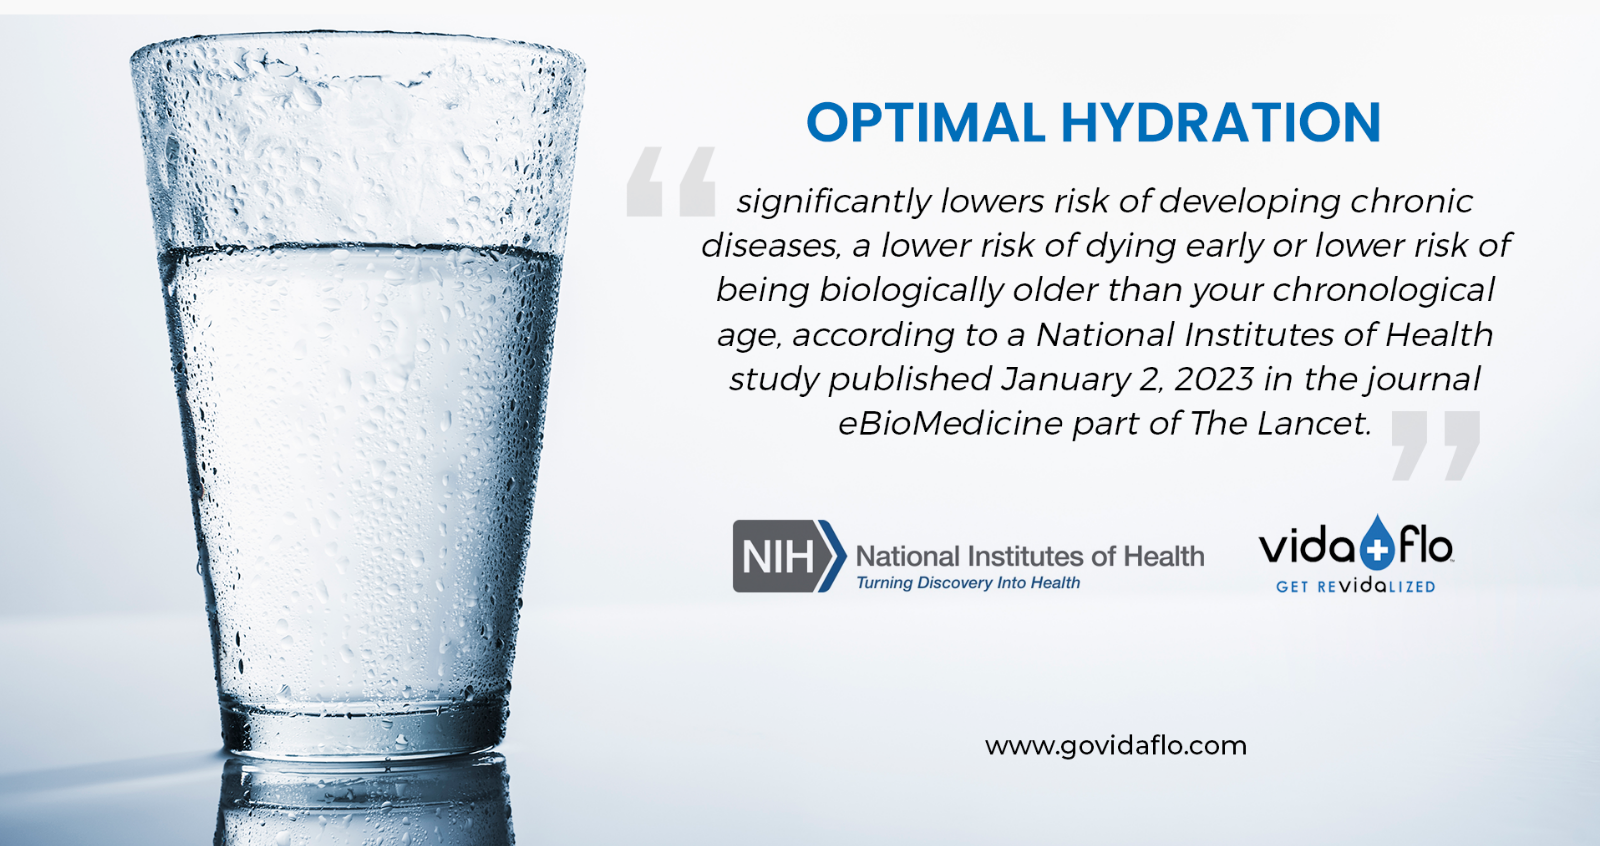 An image of a glass of water with a quote on optimal hydration in Hendersonville, TN.